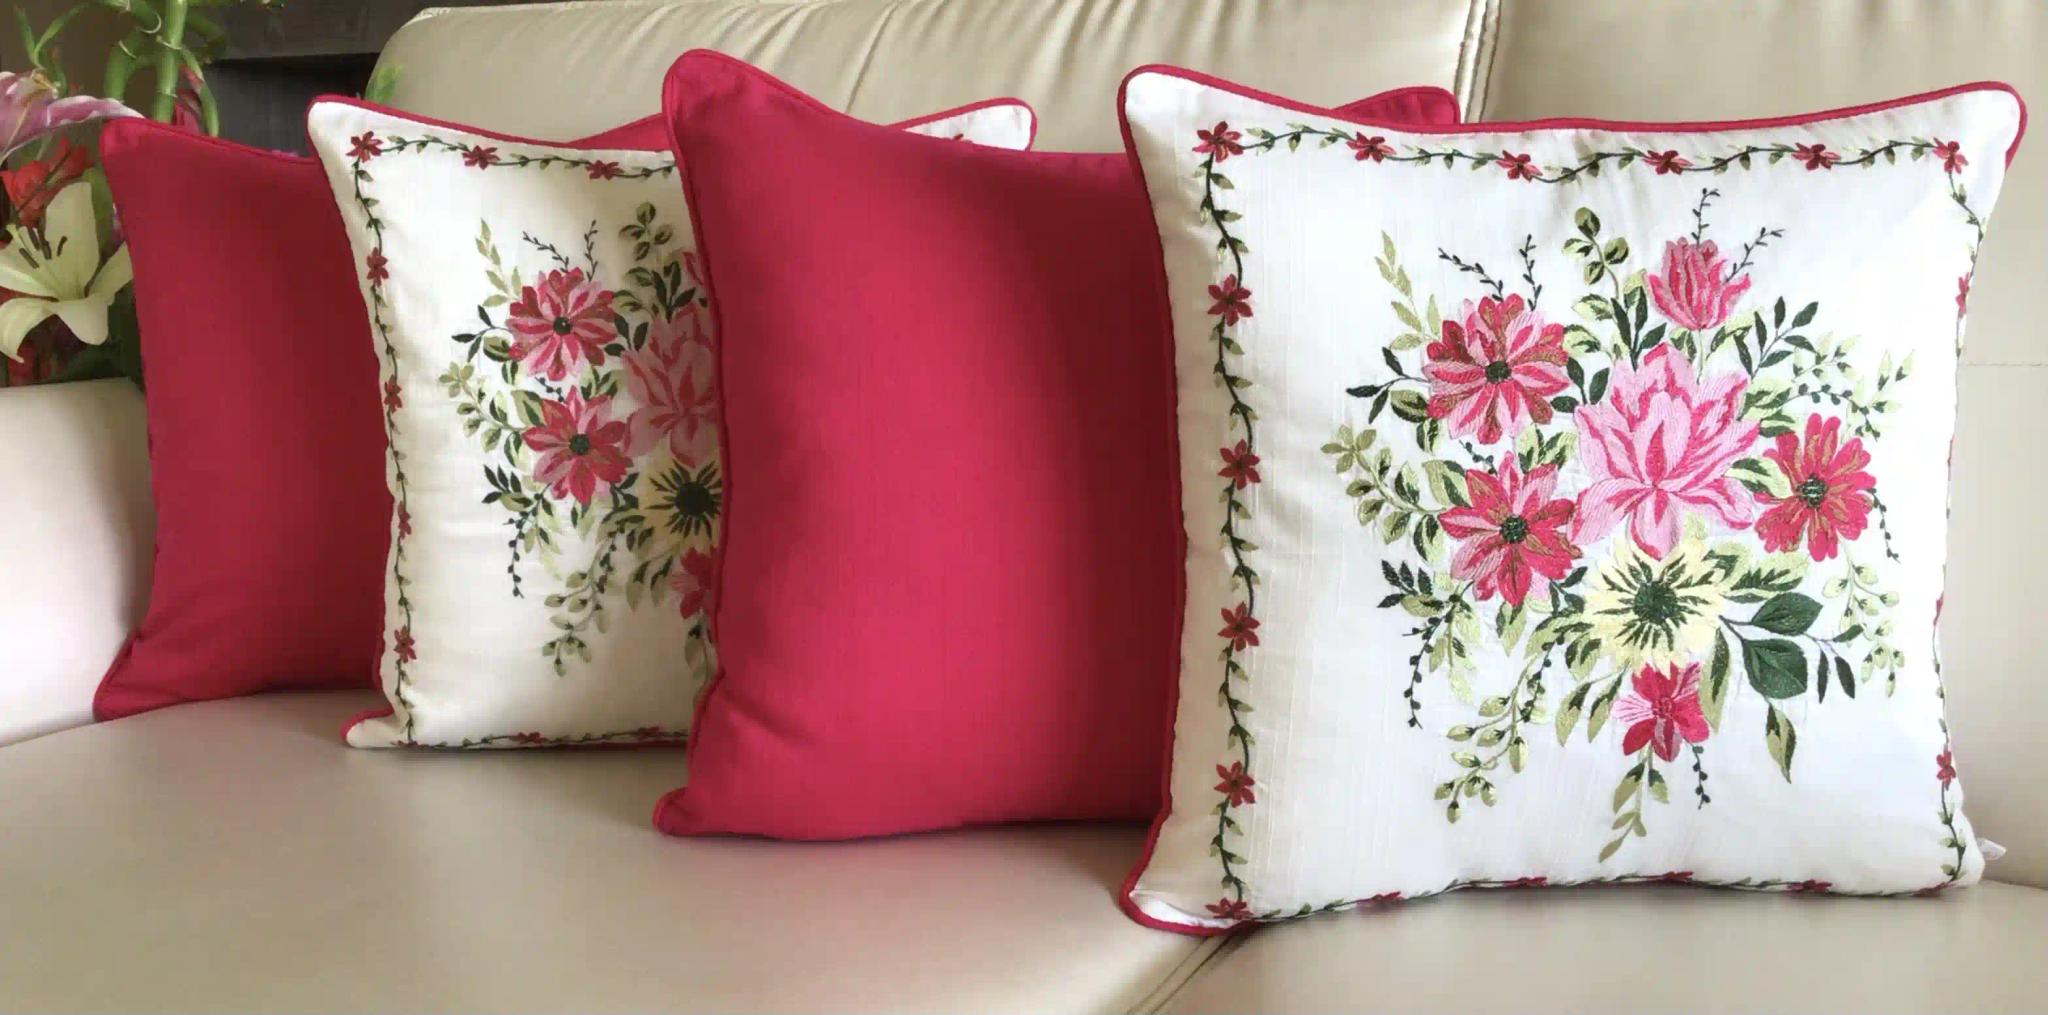 My Fairy Lady- Embroidered Cotton Silk Cushion Covers- Set of 2- Fuchsia Pink